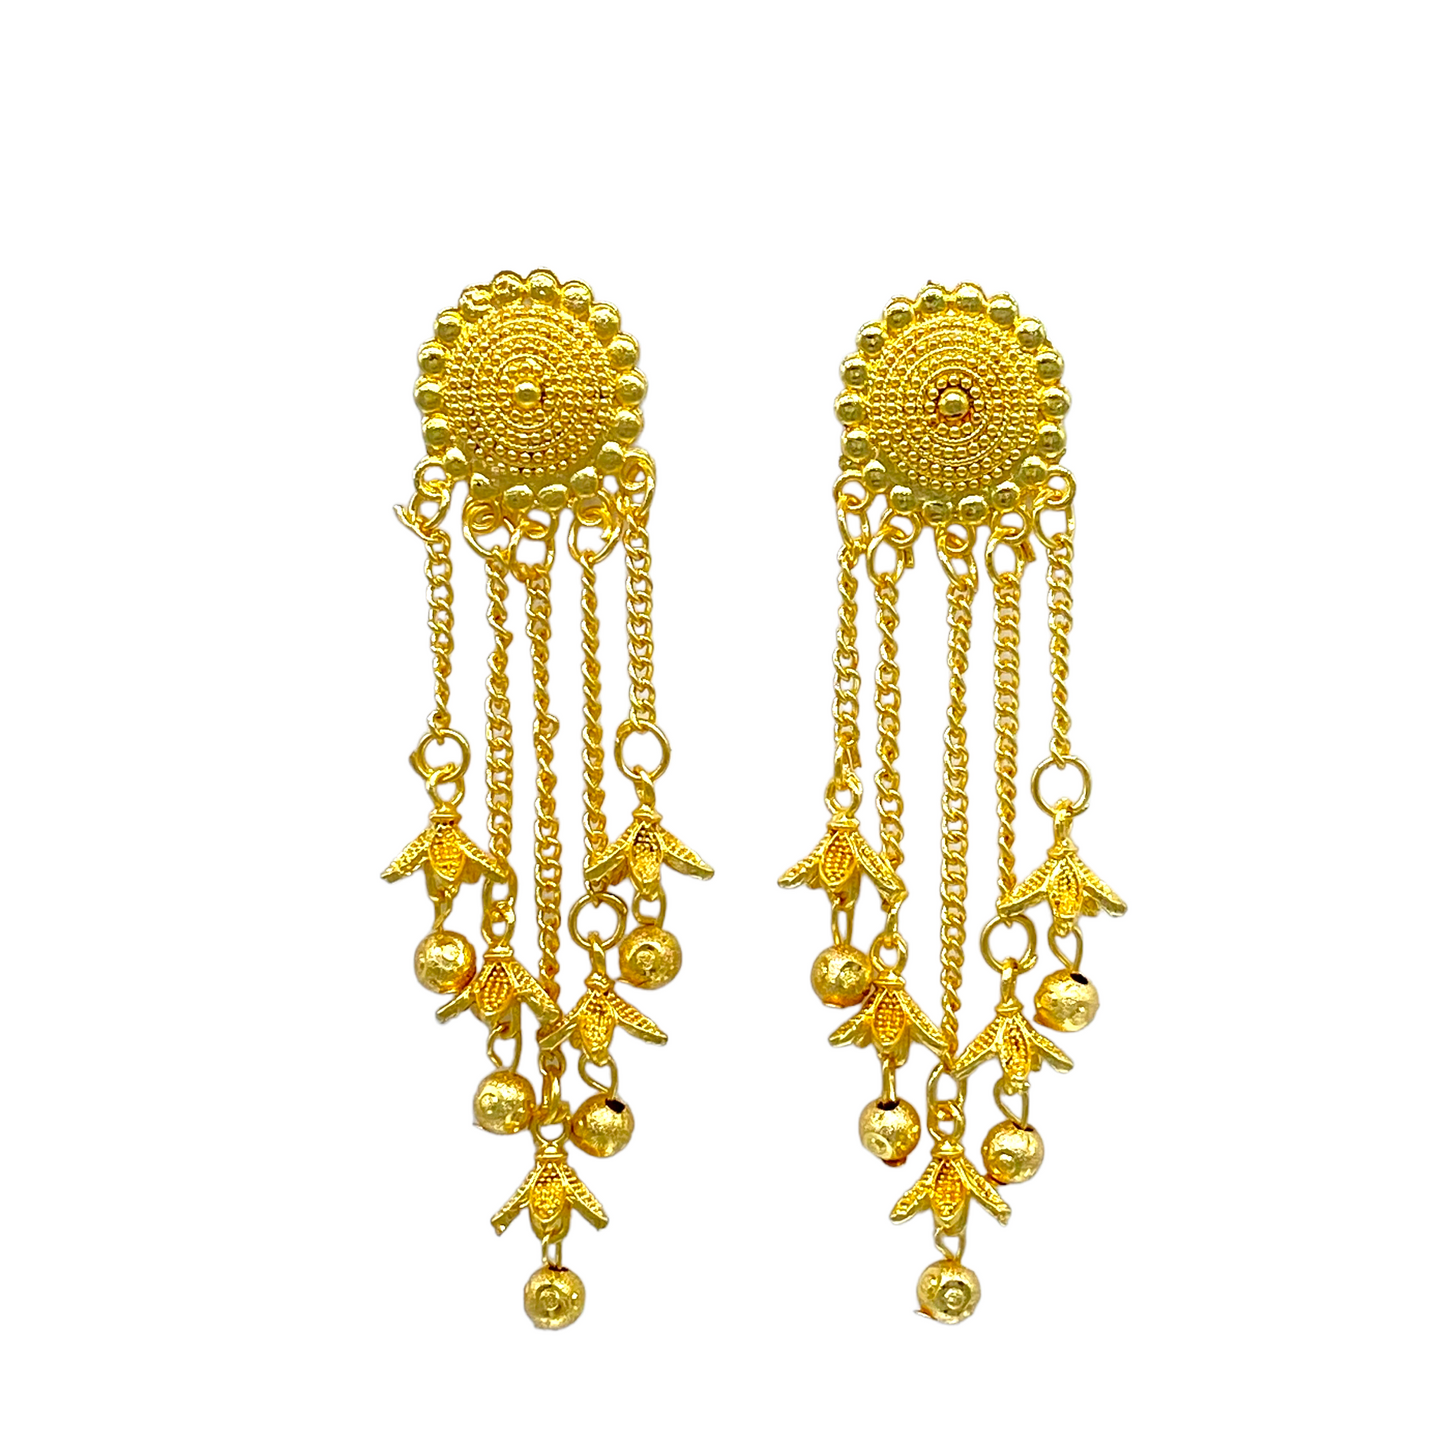 Gold circular studded Earring with gold chain tassel and small zumkhi